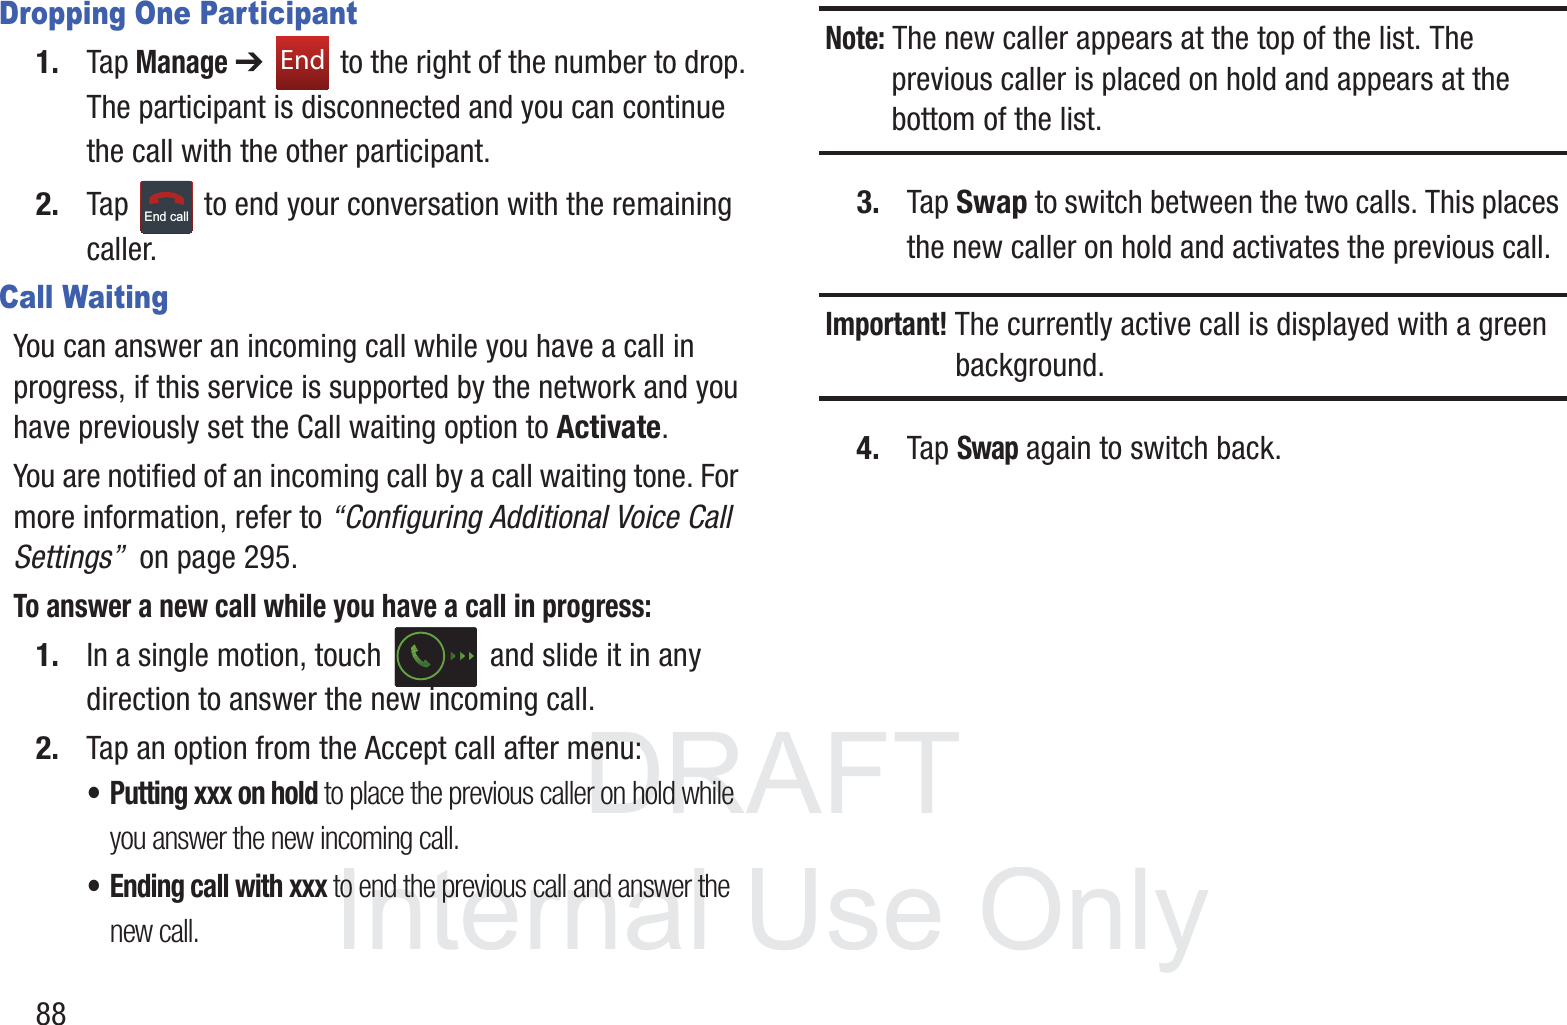 DRAFT InternalUse Only88Dropping One Participant1. Tap Manage ➔   to the right of the number to drop.The participant is disconnected and you can continue the call with the other participant.2. Tap   to end your conversation with the remaining caller.Call WaitingYou can answer an incoming call while you have a call in progress, if this service is supported by the network and you have previously set the Call waiting option to Activate.  You are notified of an incoming call by a call waiting tone. For more information, refer to “Configuring Additional Voice Call Settings”  on page 295.To answer a new call while you have a call in progress:1. In a single motion, touch   and slide it in any direction to answer the new incoming call. 2. Tap an option from the Accept call after menu:• Putting xxx on hold to place the previous caller on hold while you answer the new incoming call.• Ending call with xxx to end the previous call and answer the new call.Note: The new caller appears at the top of the list. The previous caller is placed on hold and appears at the bottom of the list.3. Tap Swap to switch between the two calls. This places the new caller on hold and activates the previous call. Important! The currently active call is displayed with a green background.4. Tap Swap again to switch back.EndEnd call